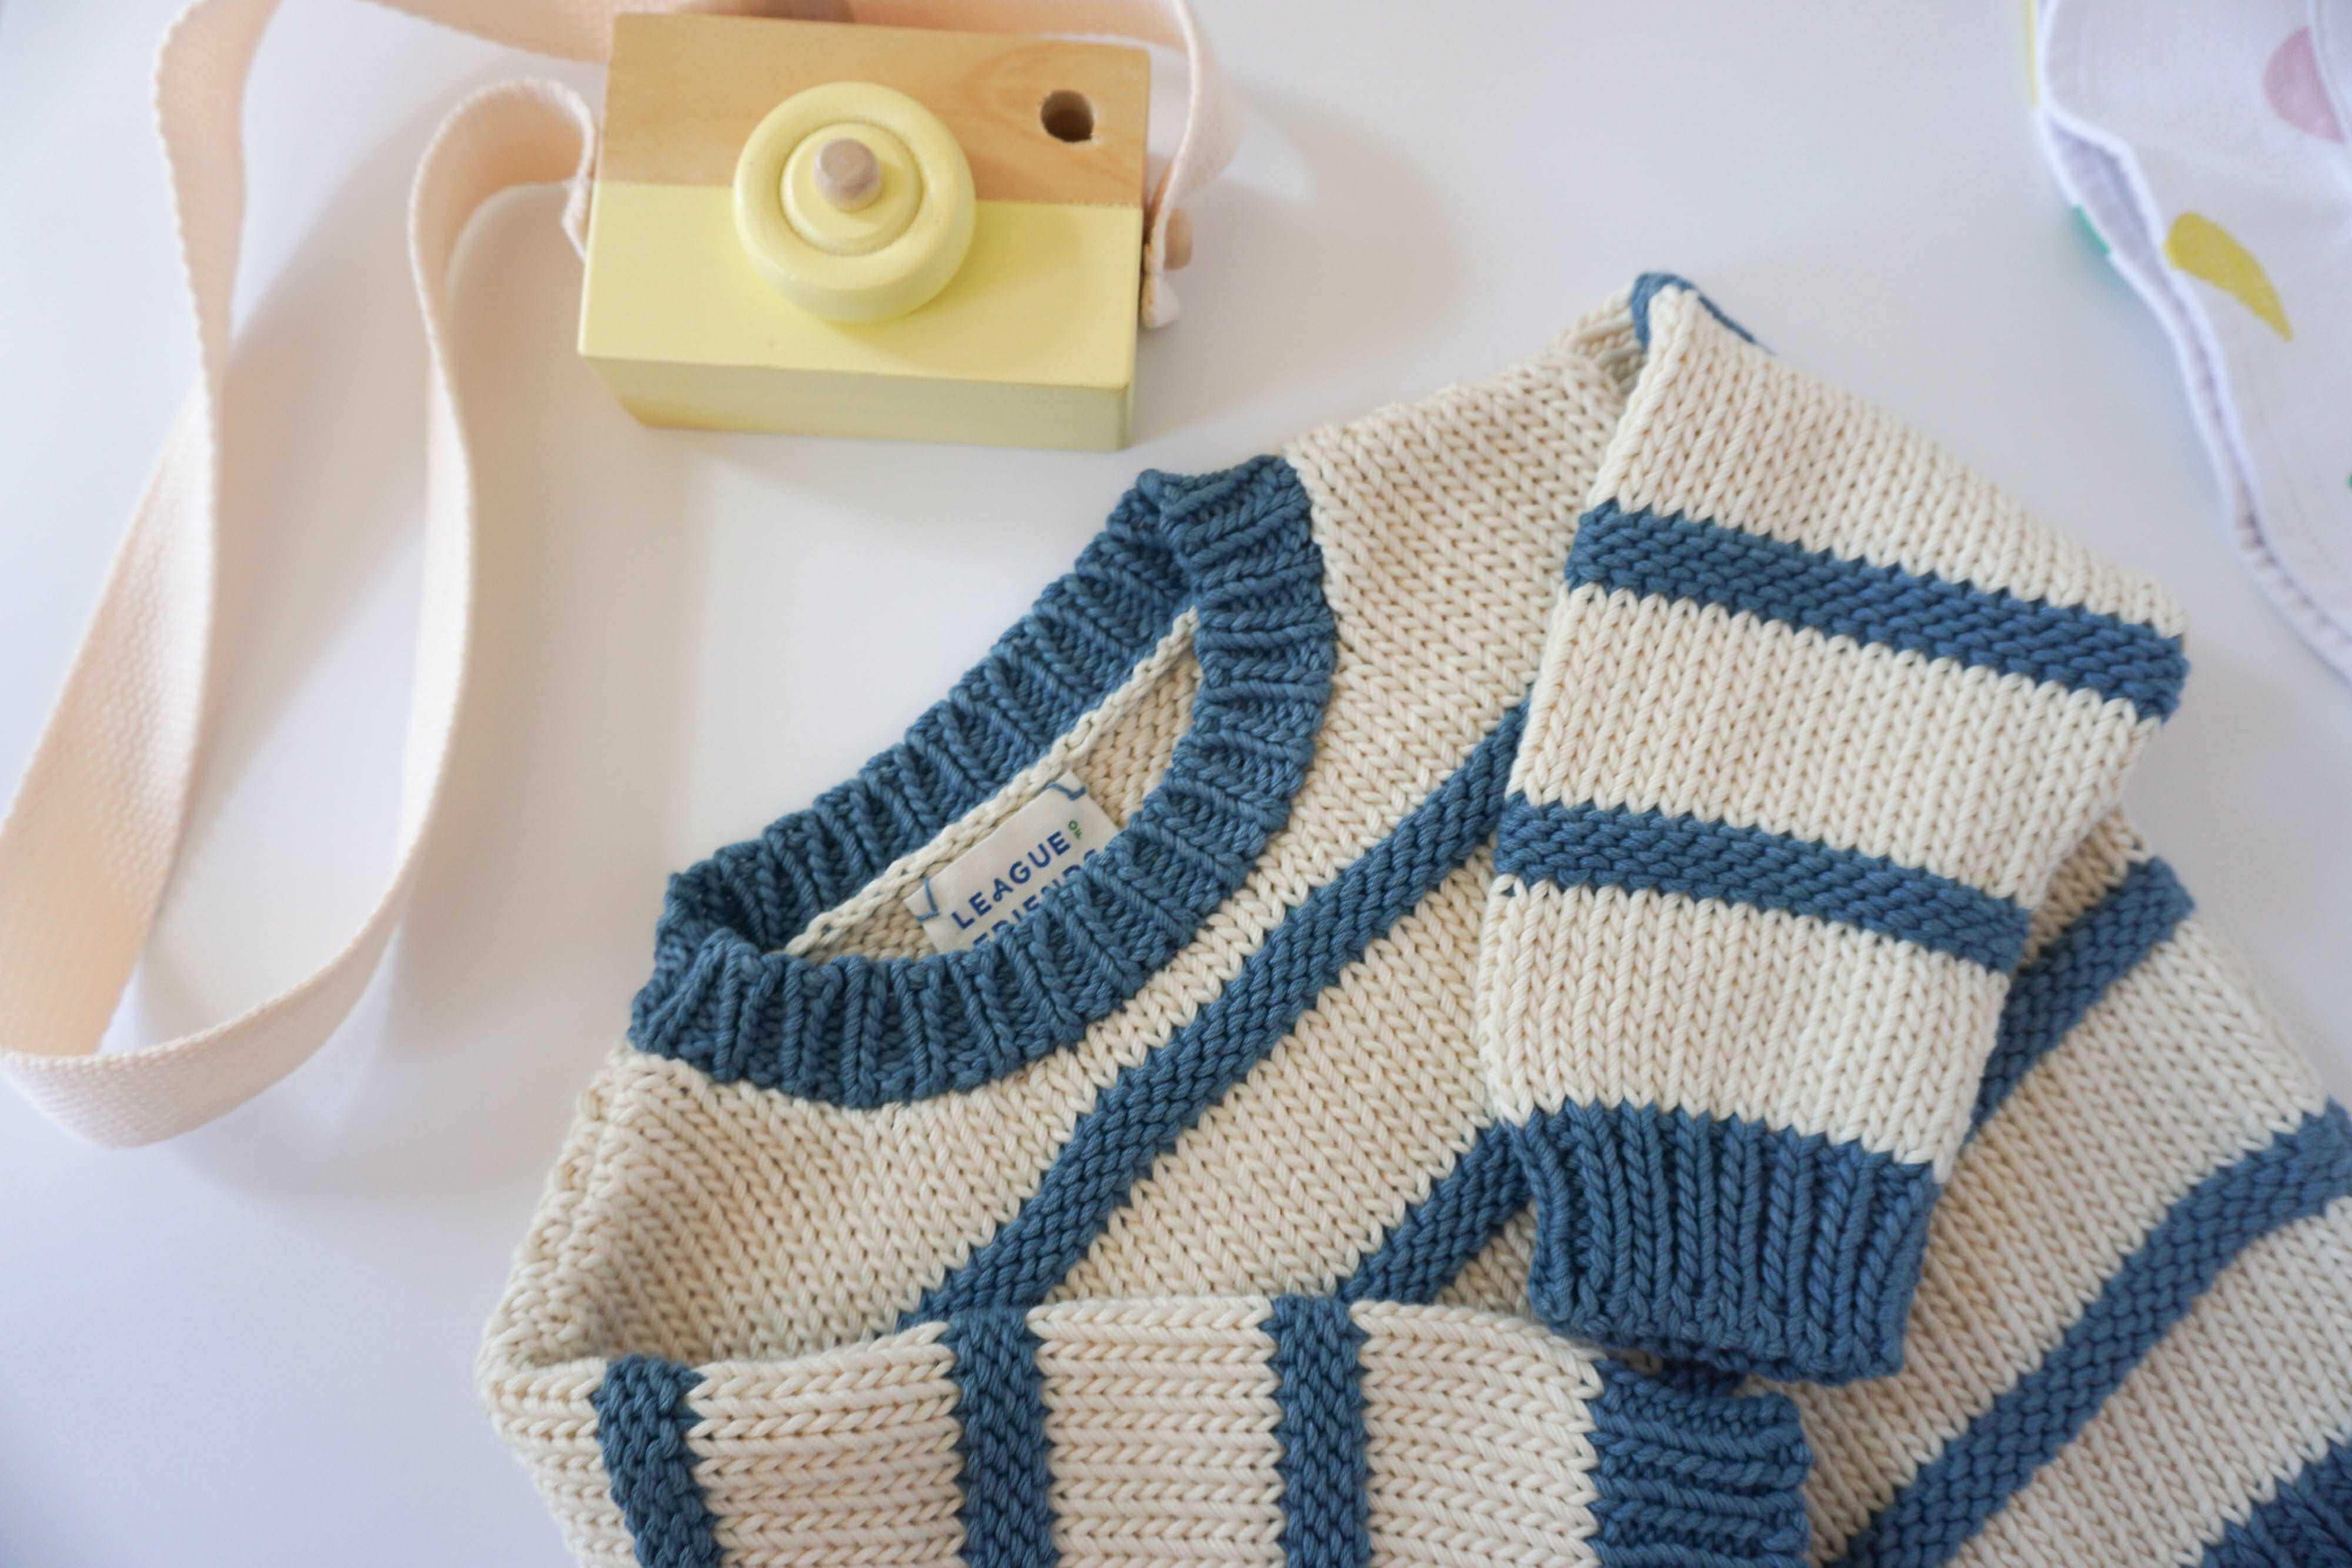 ivory and indigo blue organic cotton chunky striped sweater laying on background with sleeves folded and a yellow wooden toy camera sitting next to the sweater on the background